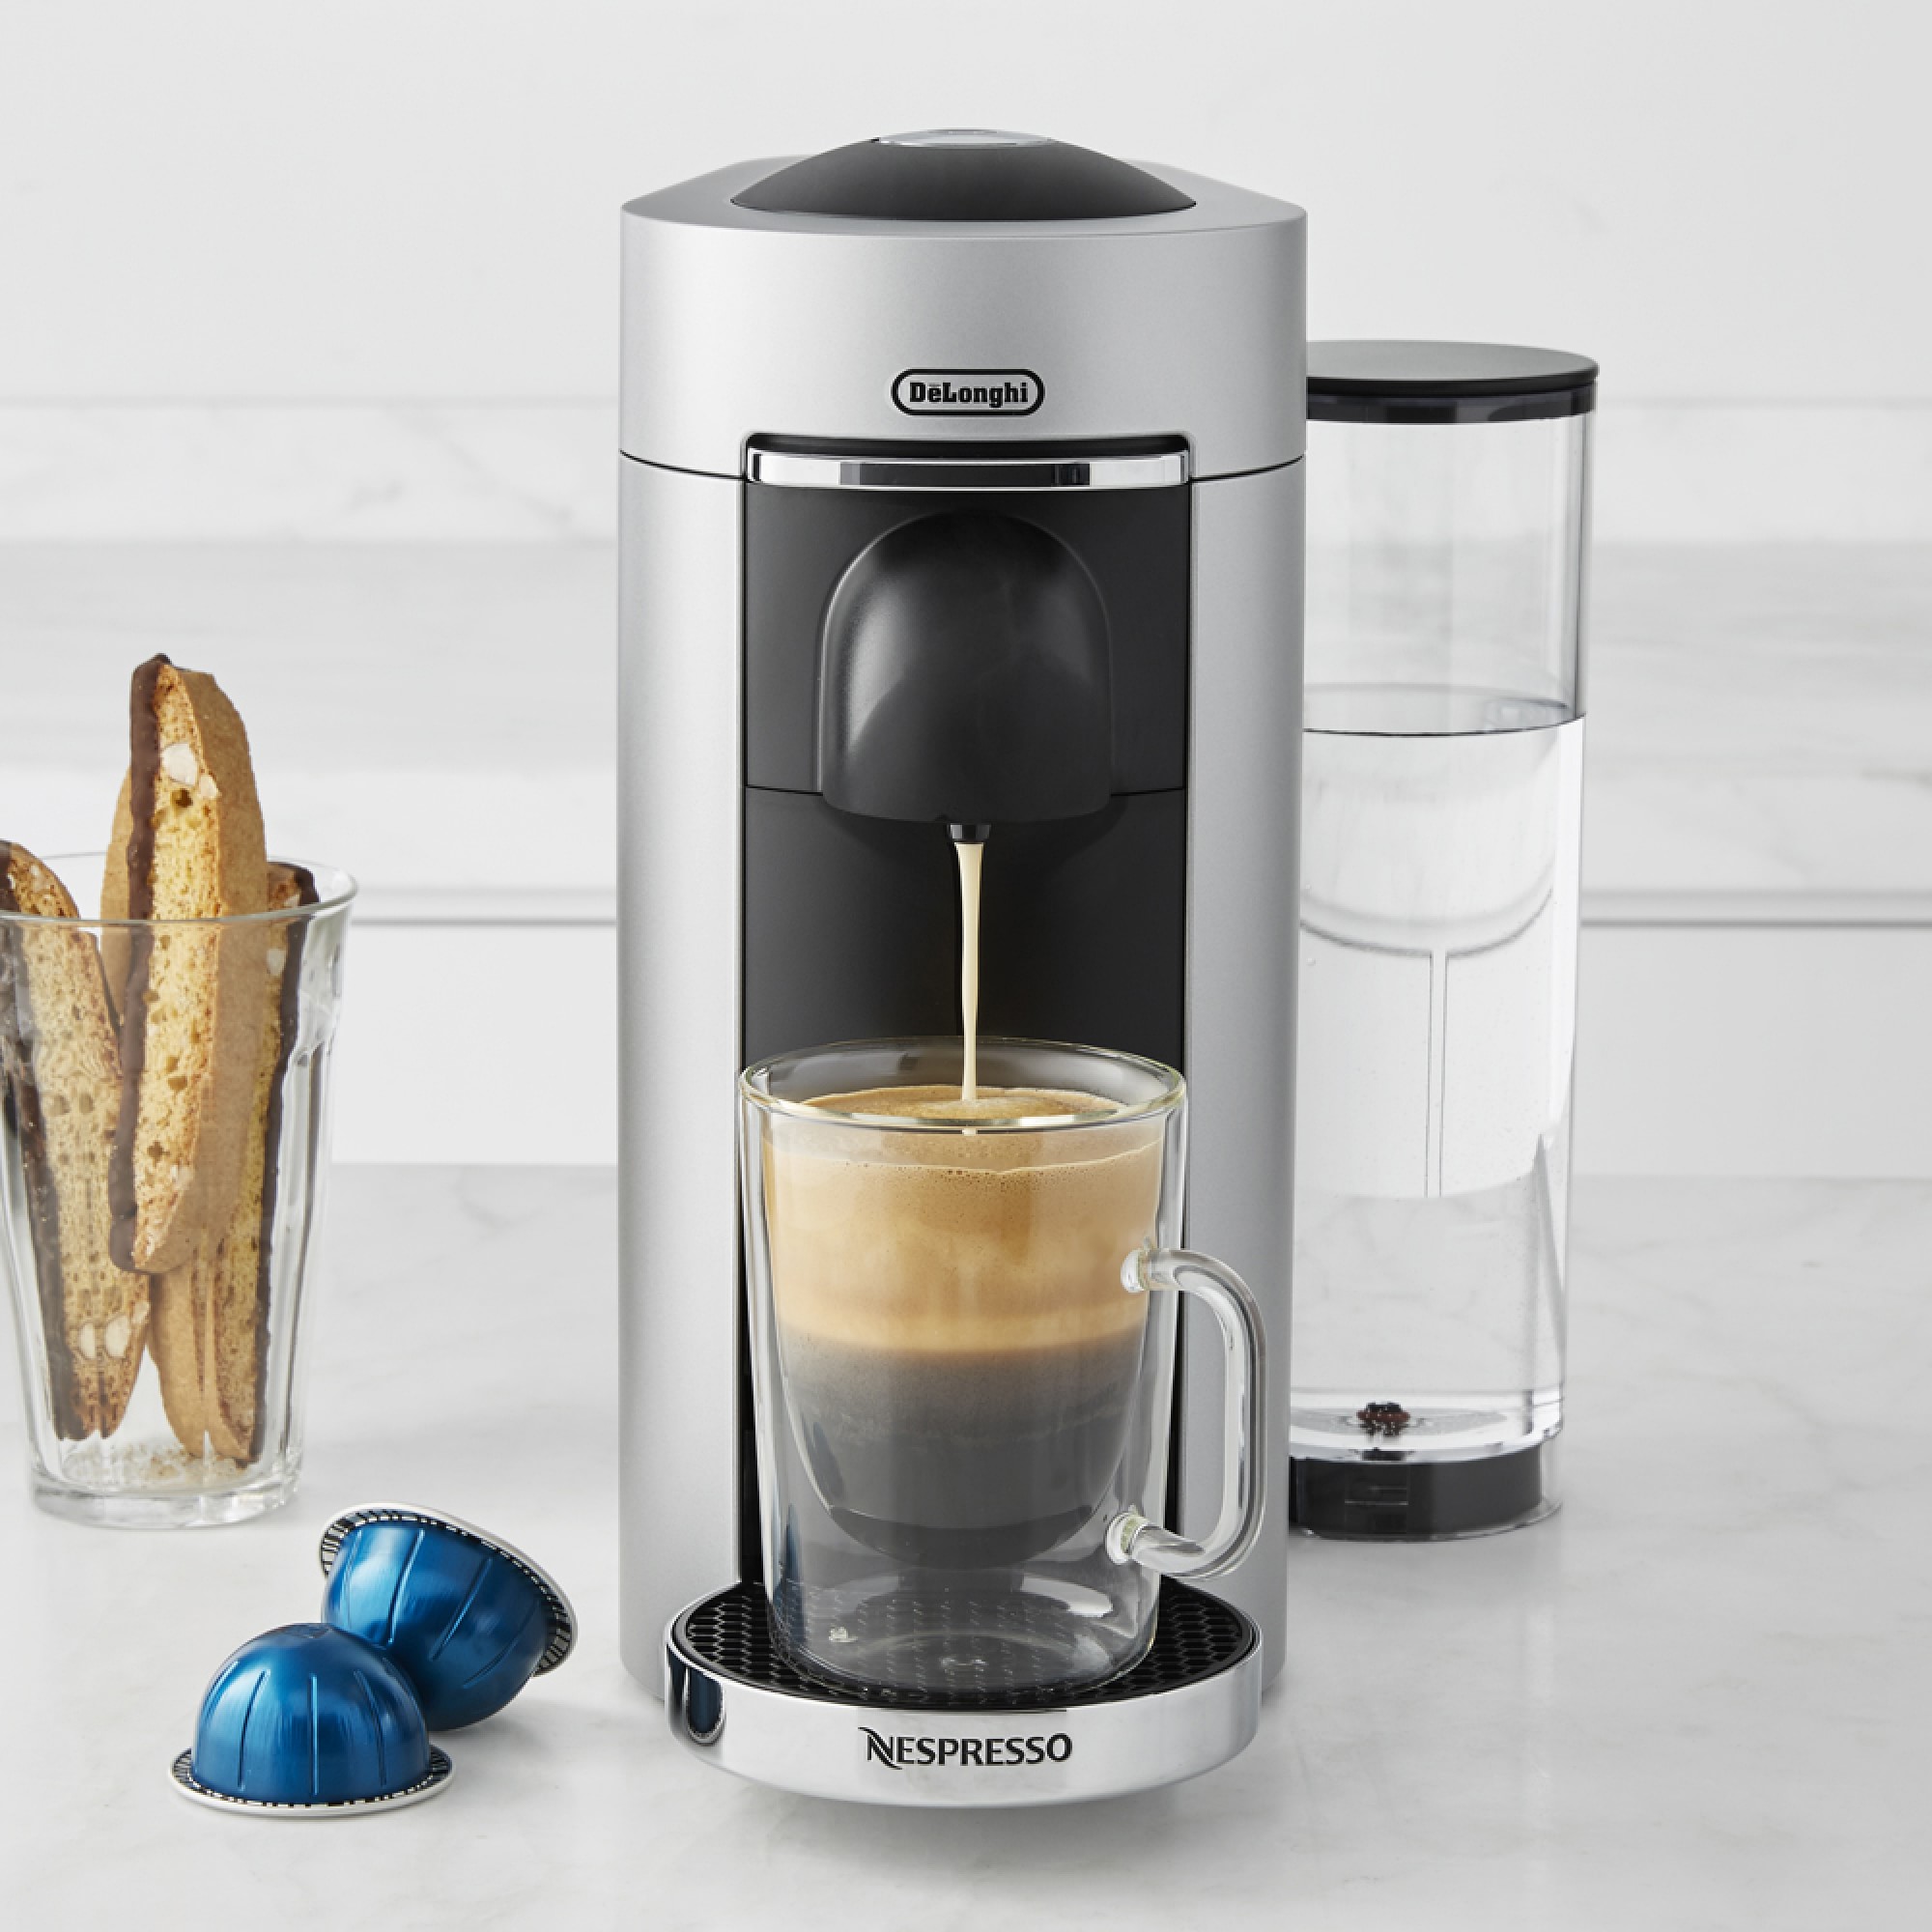 Personalize Your Perfect Cup with Nespresso Machines: Customizing Your Coffee